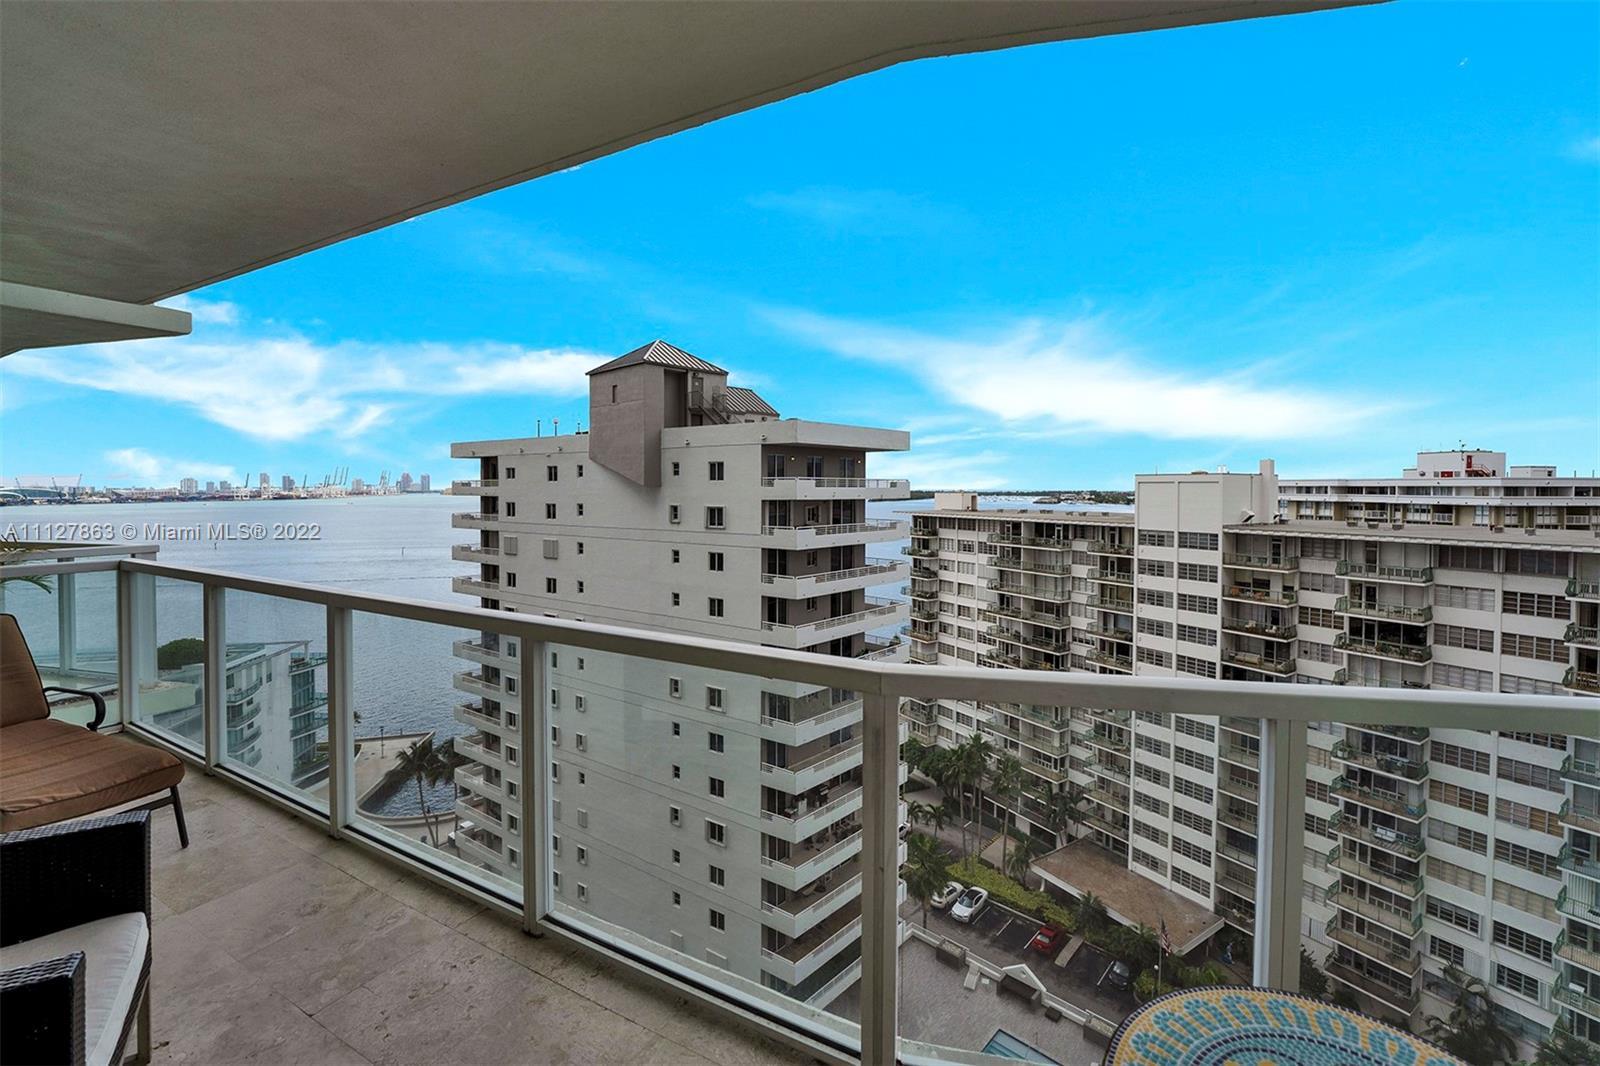 SPECTACULAR FURNISHED 2 BED / 2.5 BATH WITH 1,298 SF. AT THE EMERALD AT BRICKELL IN THE VIBRANT BRIC